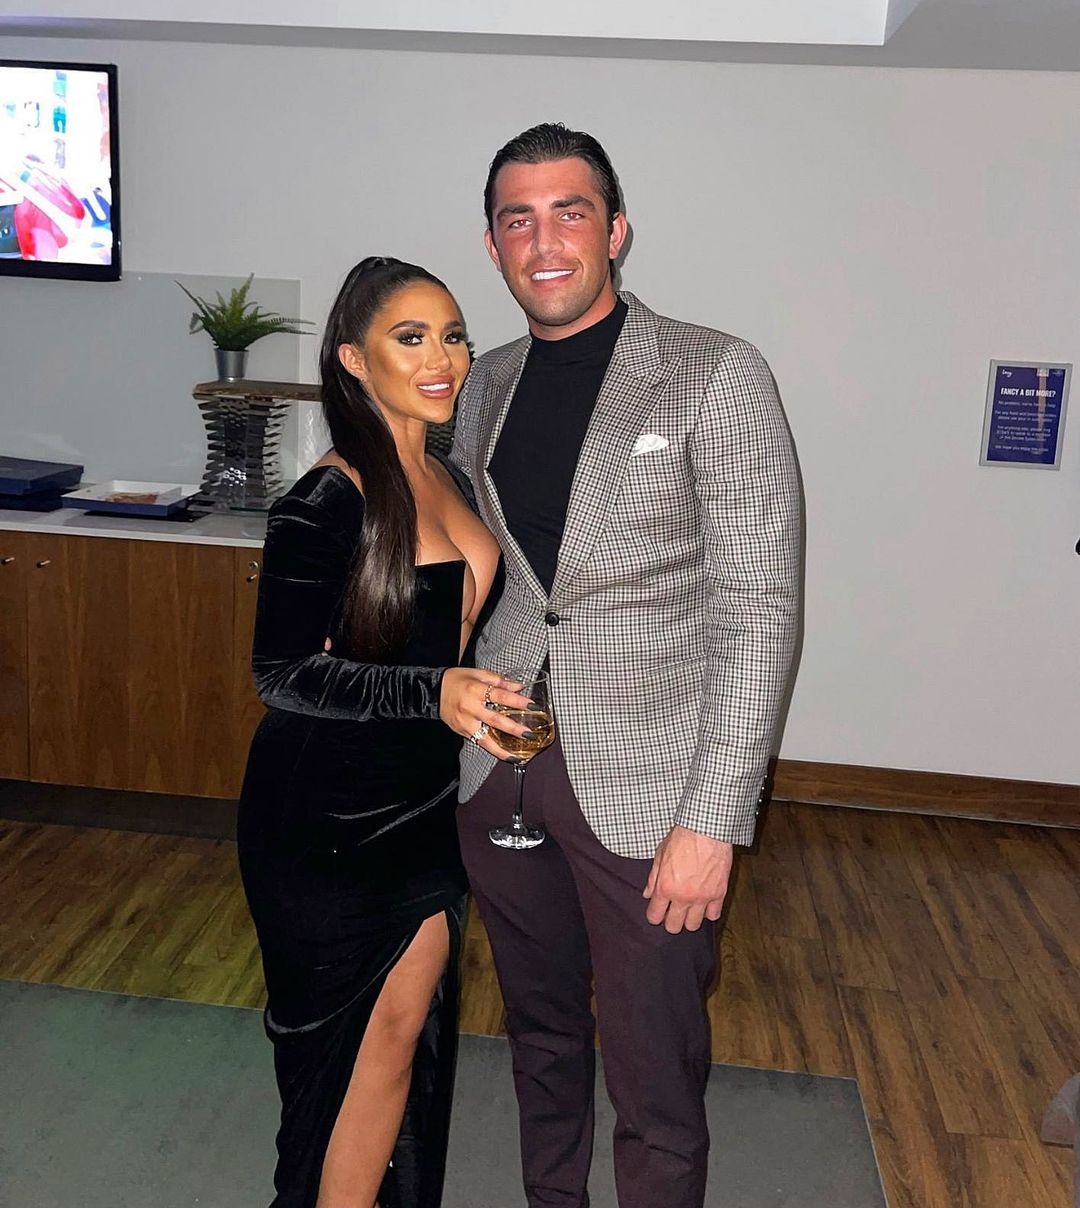 TOWIE's Chloe Brockett hints she’s dating Love Island star after they reunite for cosy date